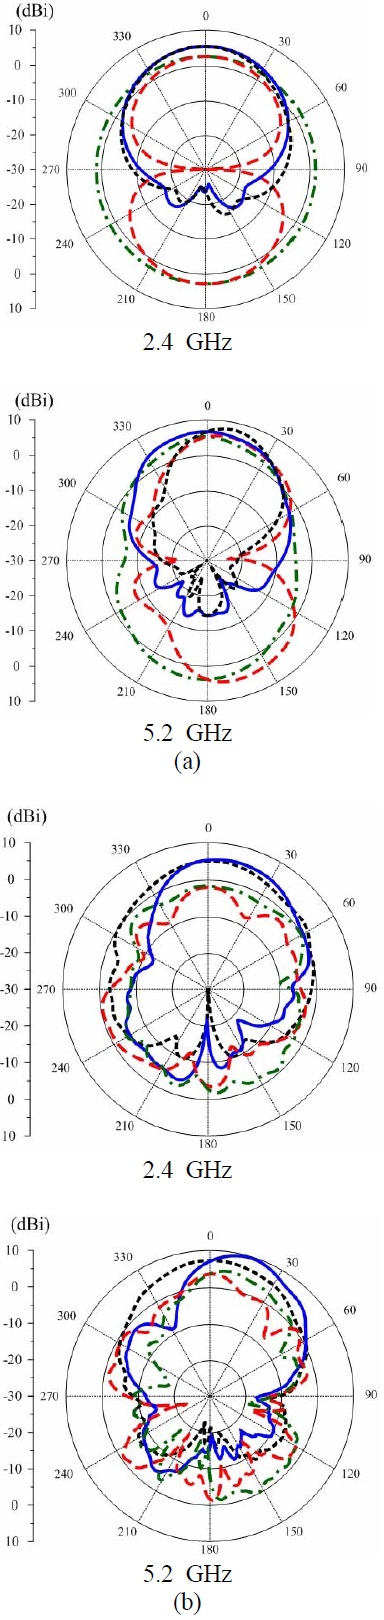 Radiation patterns of a monopole antenna in free space and over an artificial magnetic conductor (AMC) surface: (a) simulations and (b) measurements. E-plane (AMC), H-plane (AMC), E-plane (free space), and H-plane (free space).